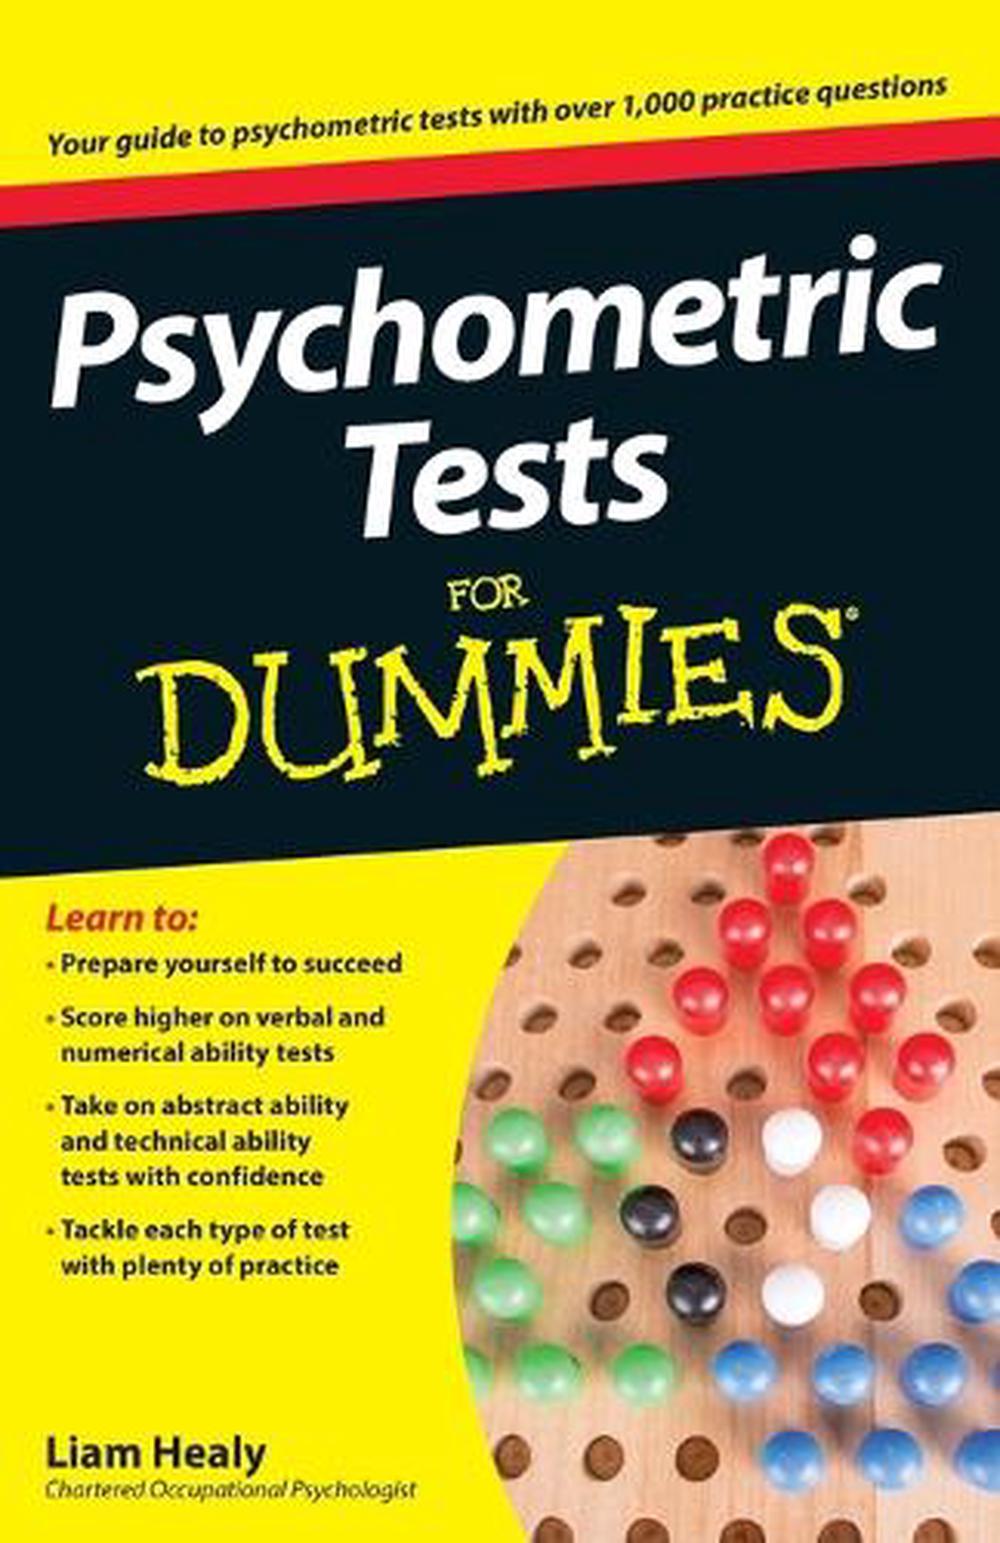 psychometric-tests-for-dummies-by-liam-healy-paperback-9780470753668-buy-online-at-the-nile